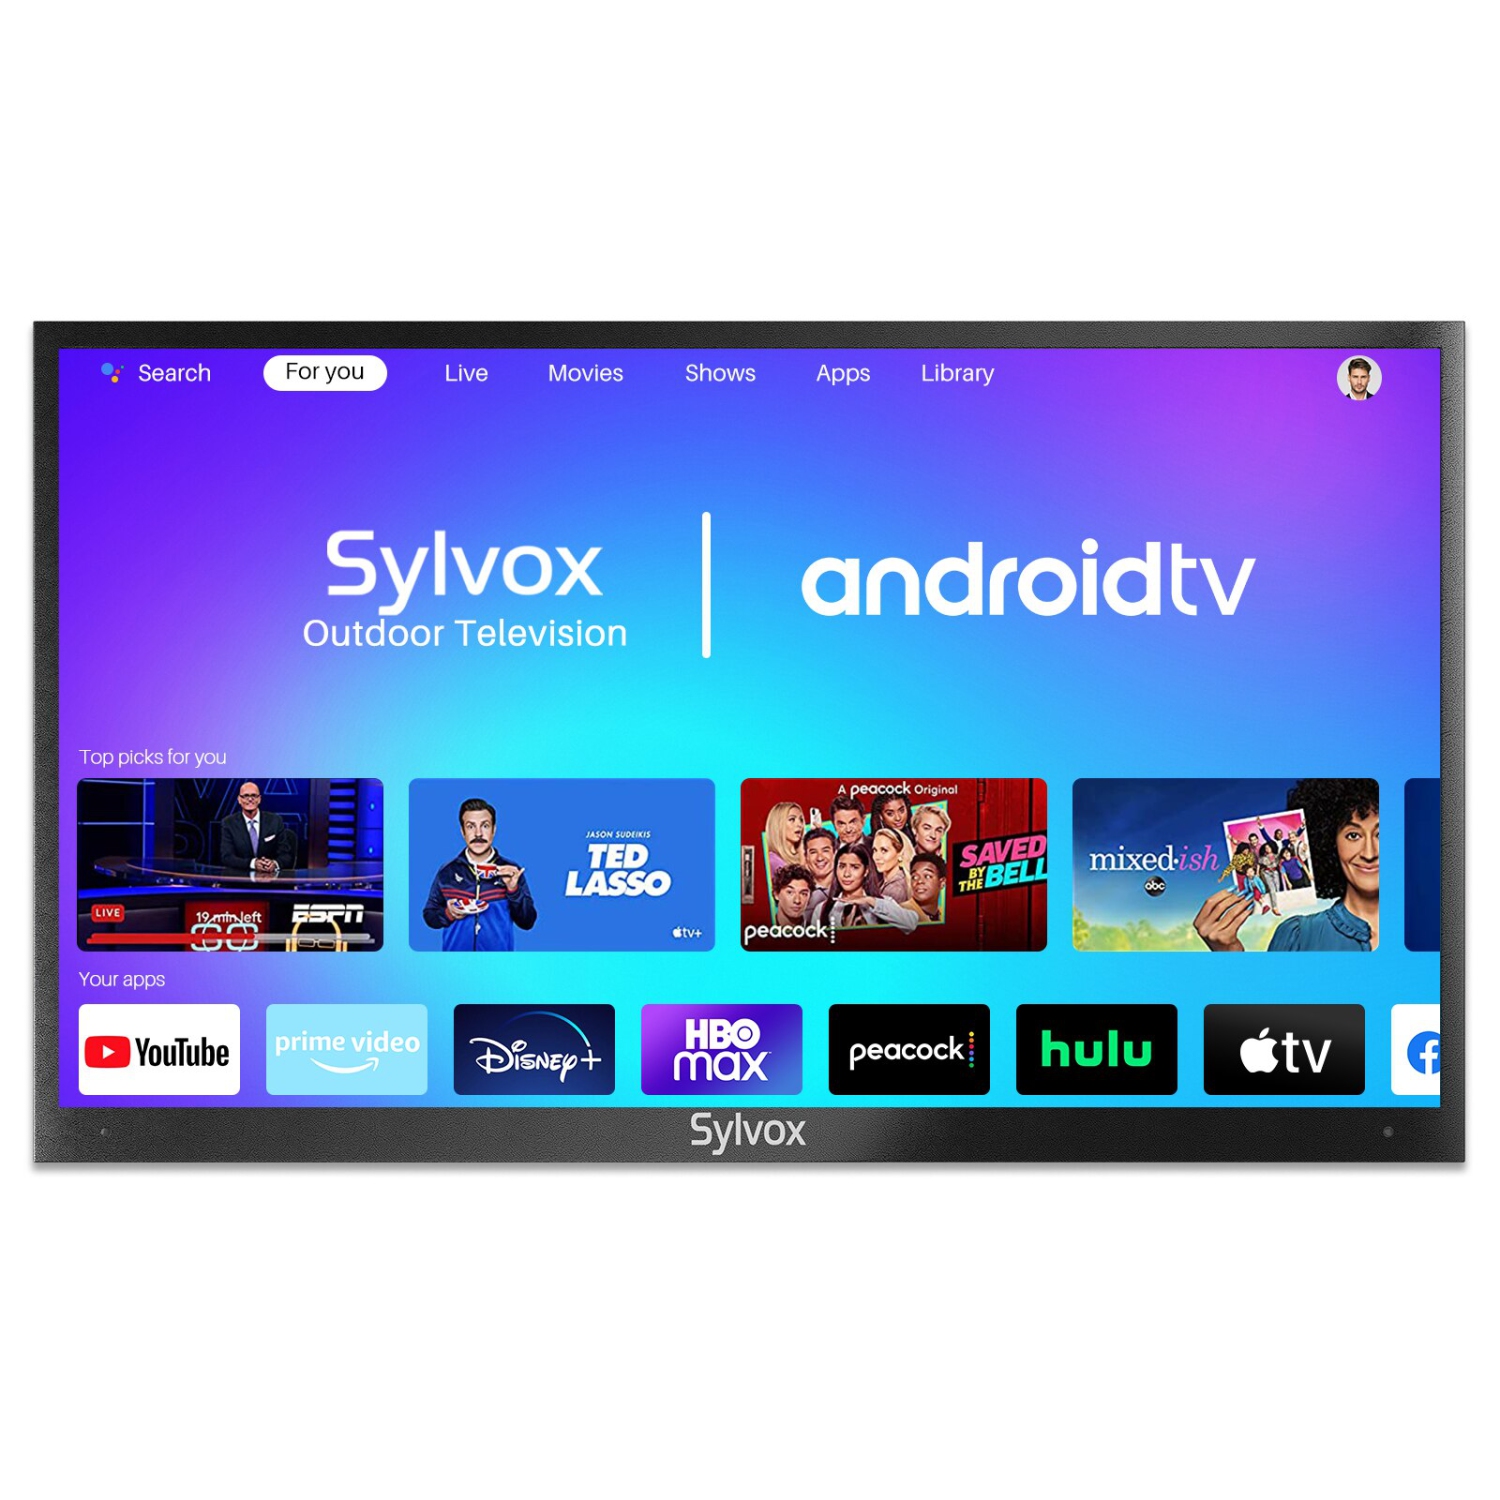 SYLVOX Outdoor TV Deck Pro Series 75" 4K UHD Smart TV with Voice Remote IP55 Waterproo Chromecast Built-in 60Hz Designed for Outdoors